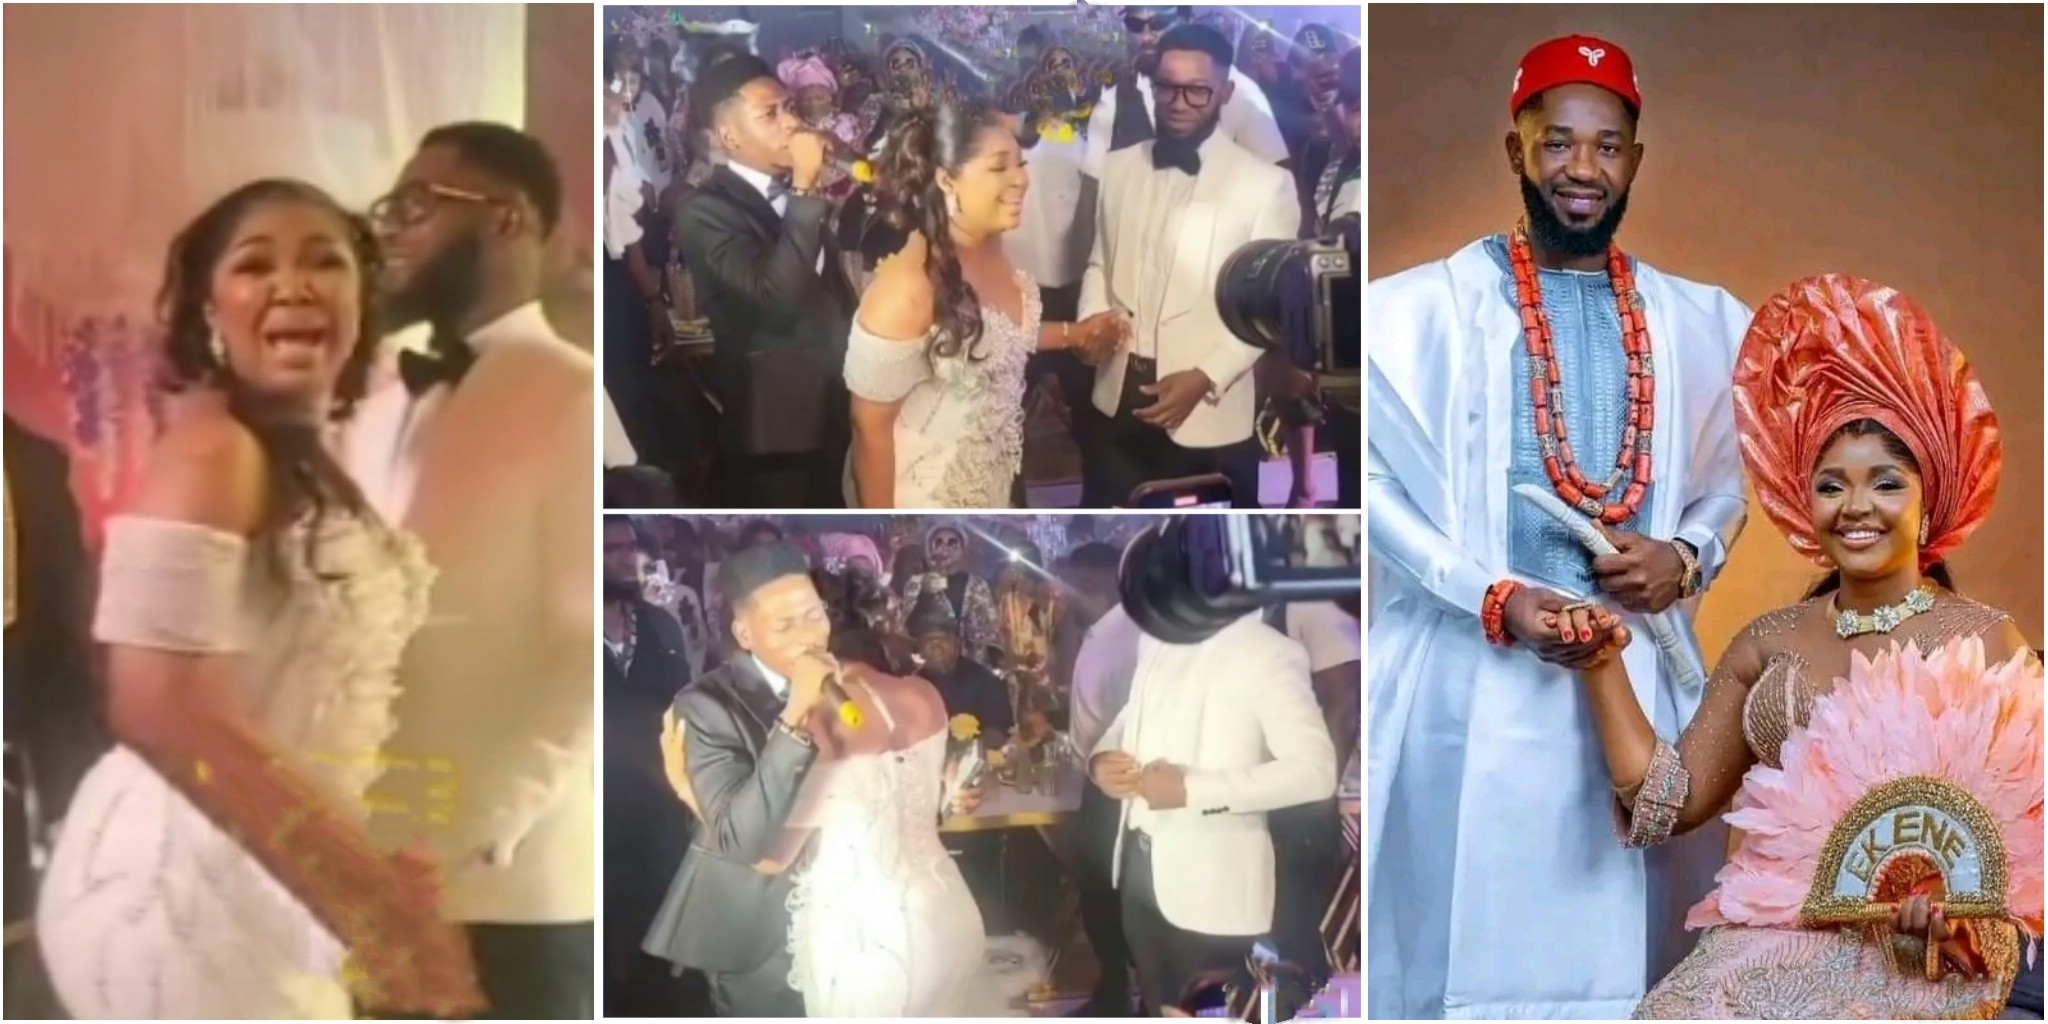 Actress Ekene Umenwa leaps for joy as Gospel Singer Moses Bliss surprises her and hubby at wedding reception